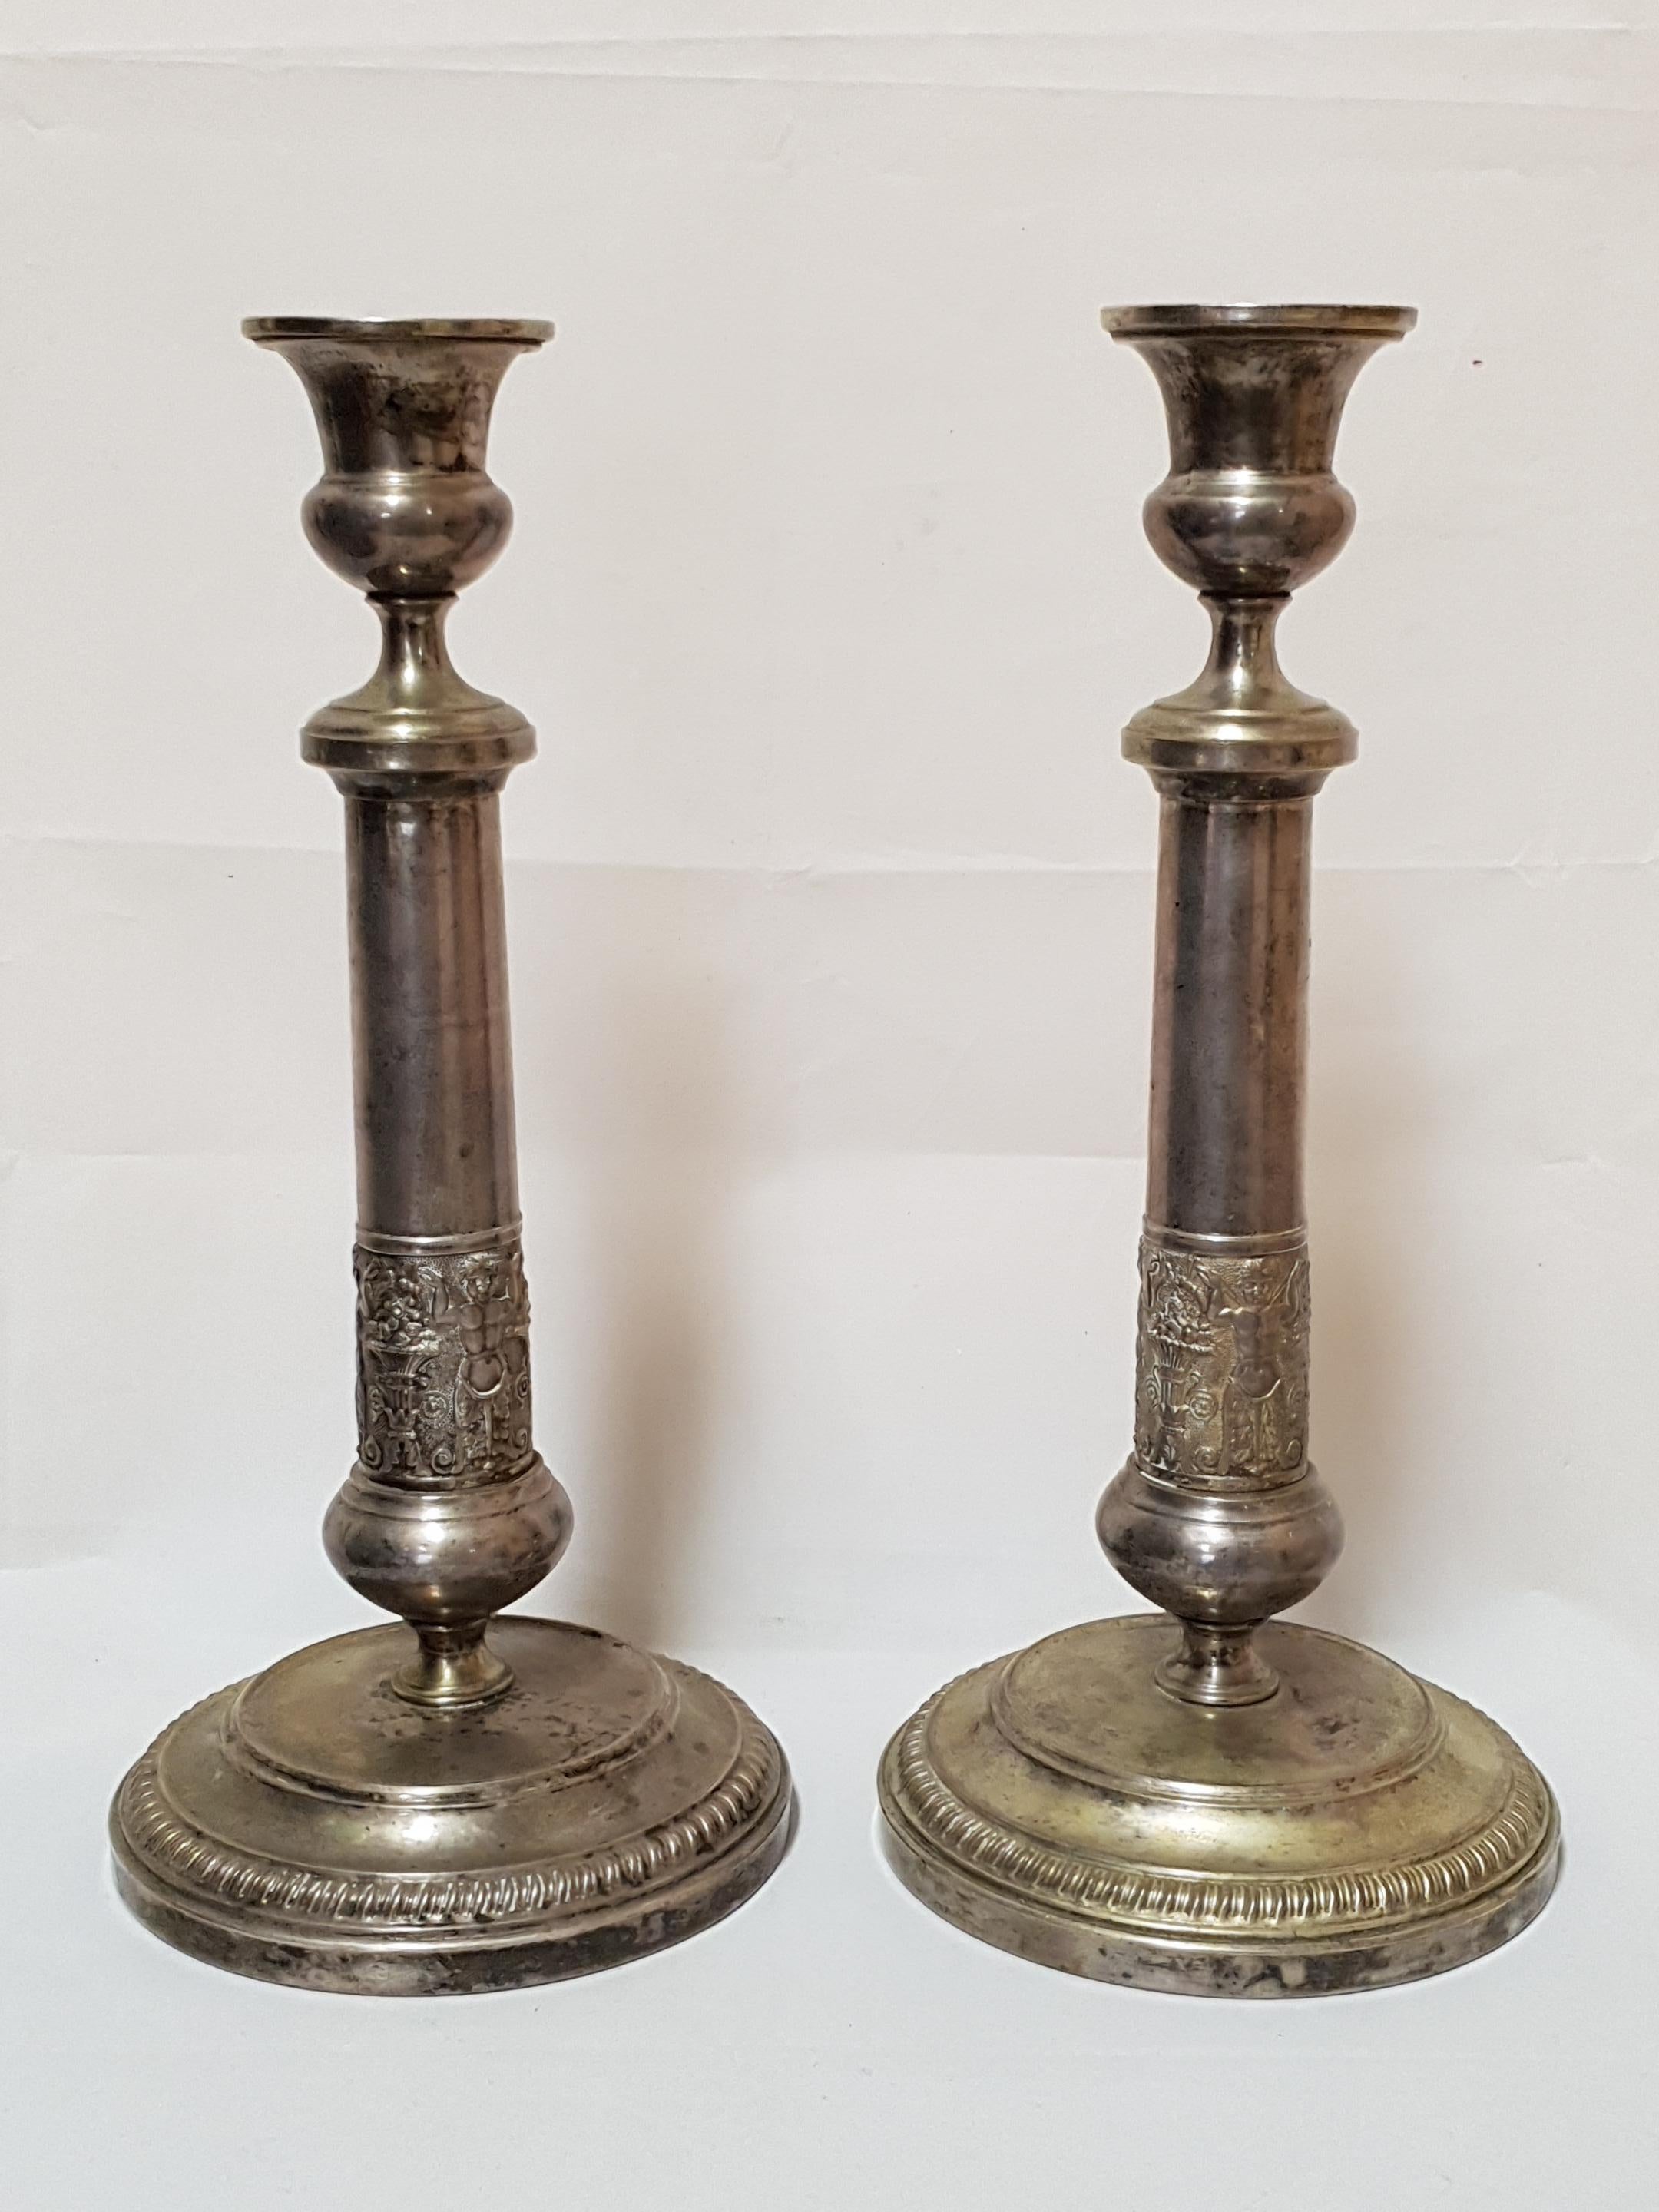 Pair of Neoclassical Silver Plated Candlesticks, 1830s (Neoklassisch)